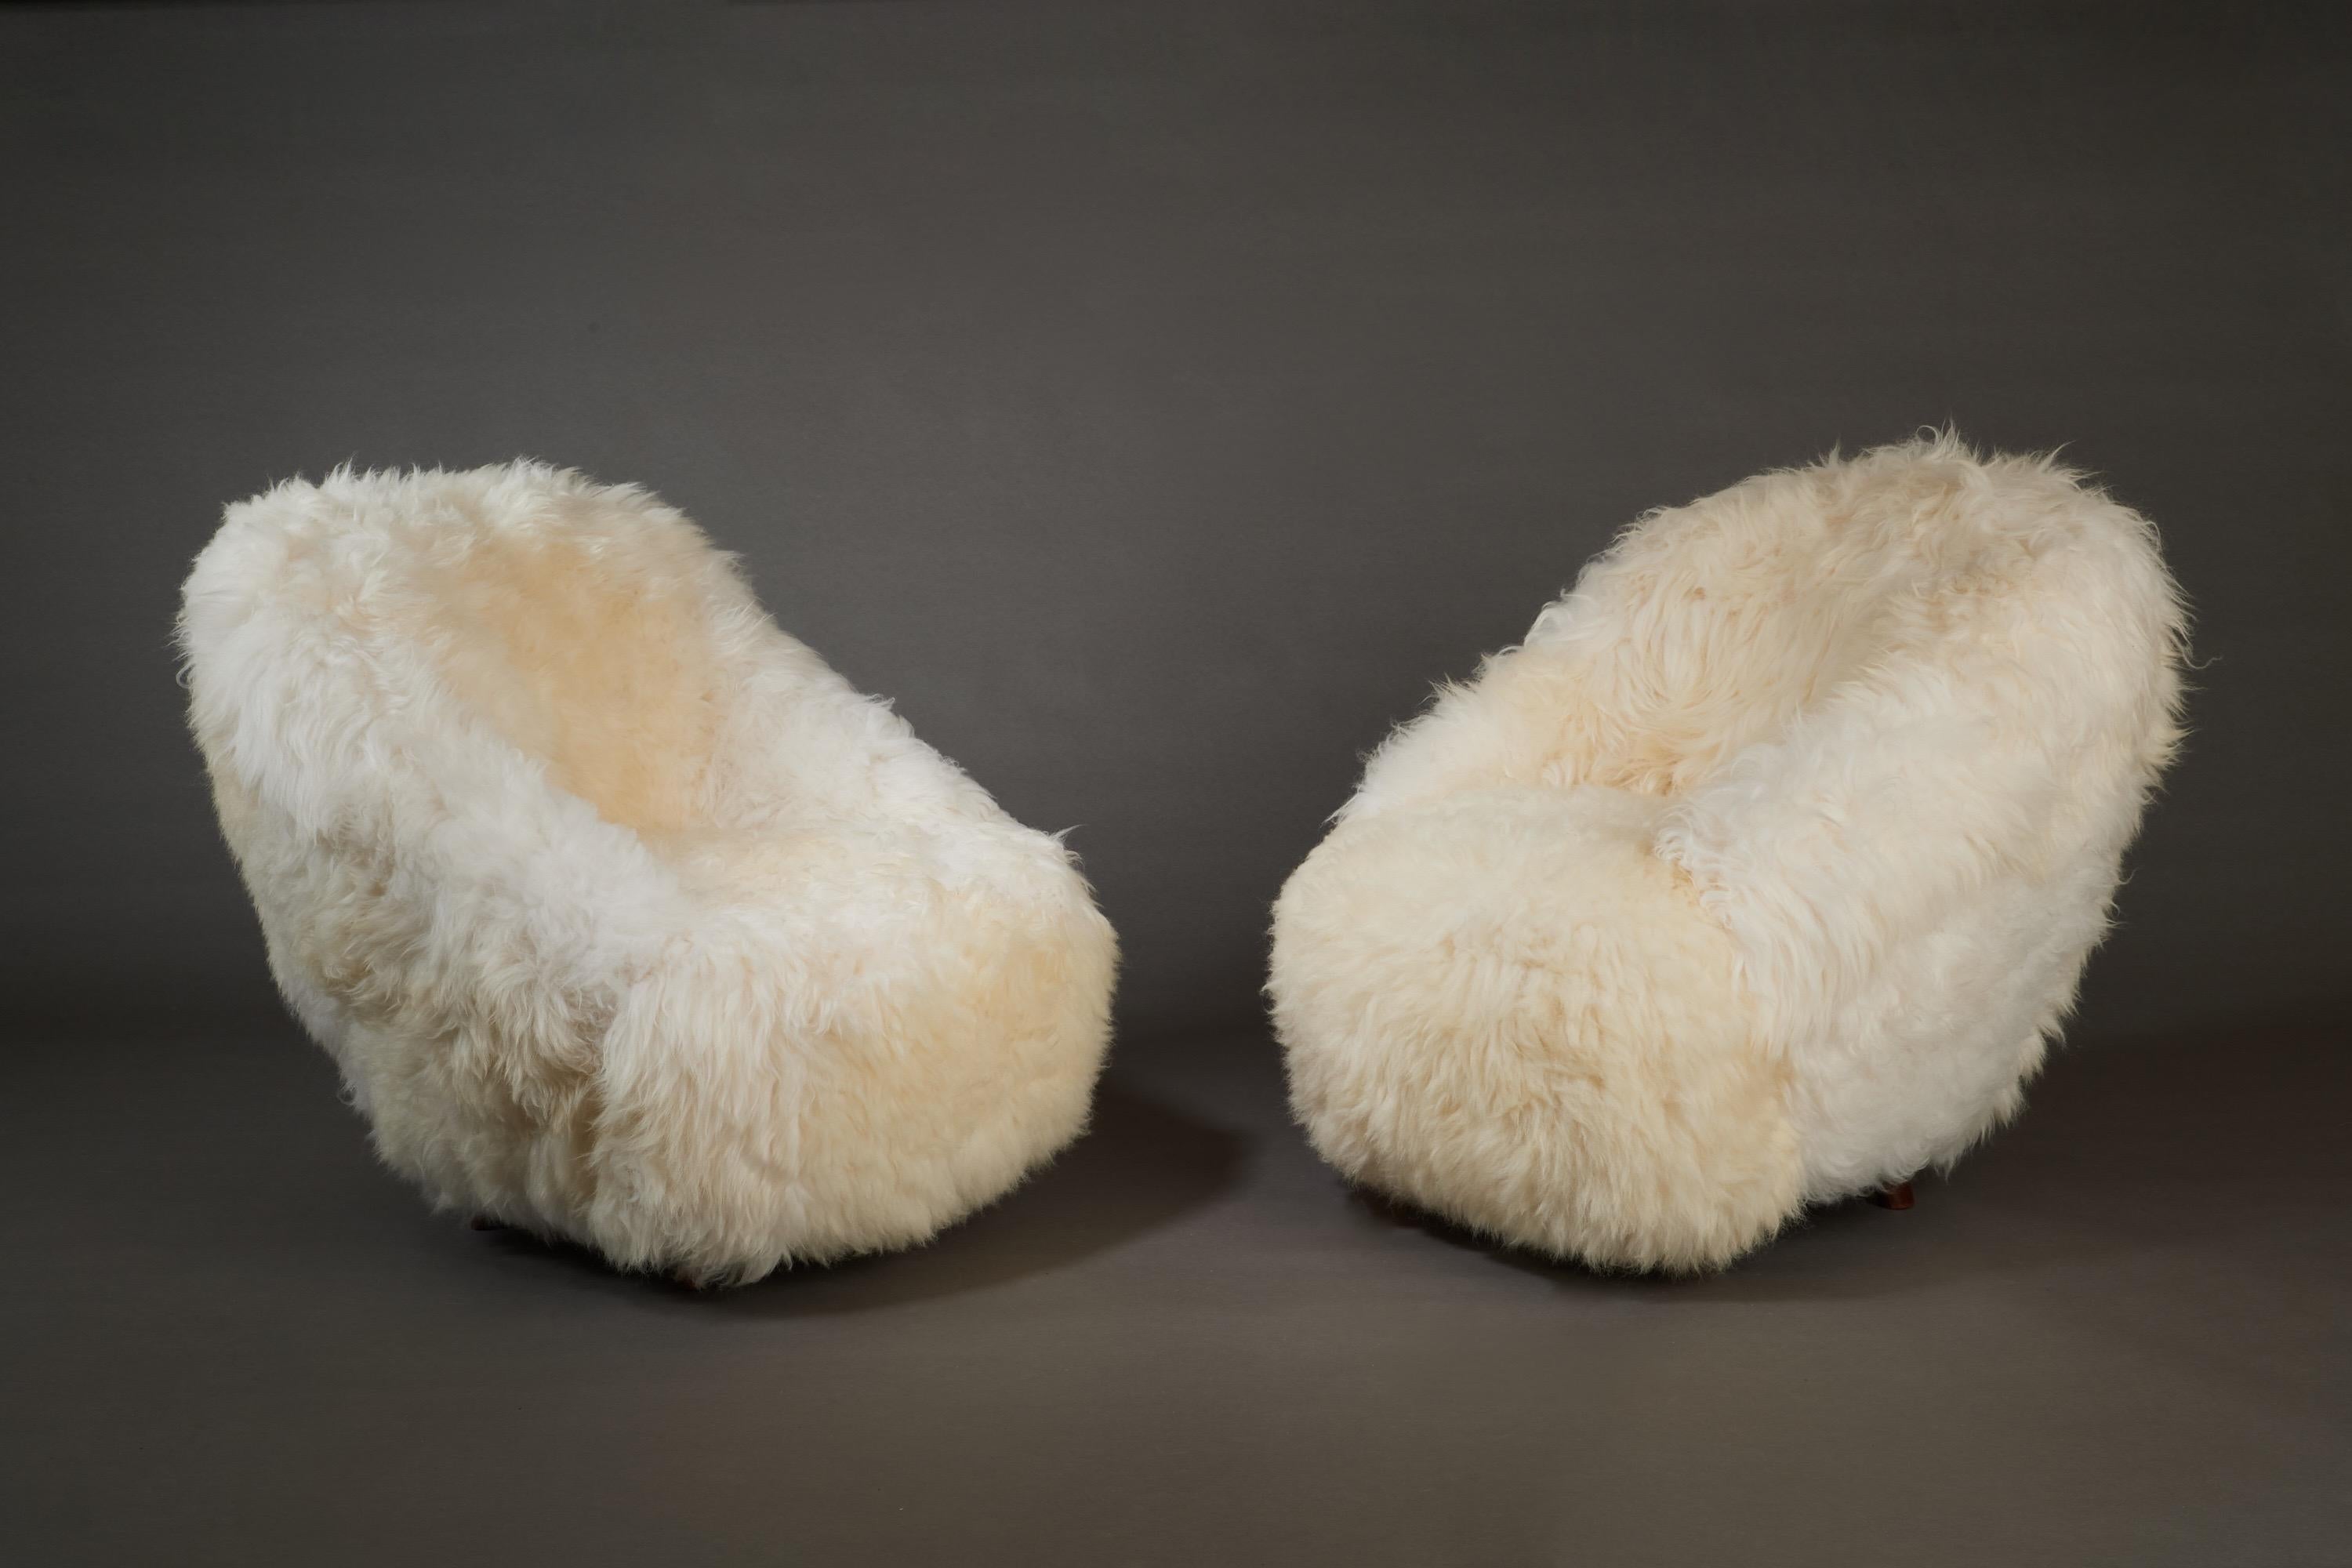 Gio Ponti (1891 - 1979)

A stunning pair of armchairs by Gio Ponti, upholstered in soft, ivory-colored longhaired lamb's wool, set on tapered mahogany legs. The stark simplicity of the design, cozily rounded construction, and lush textured sheepskin